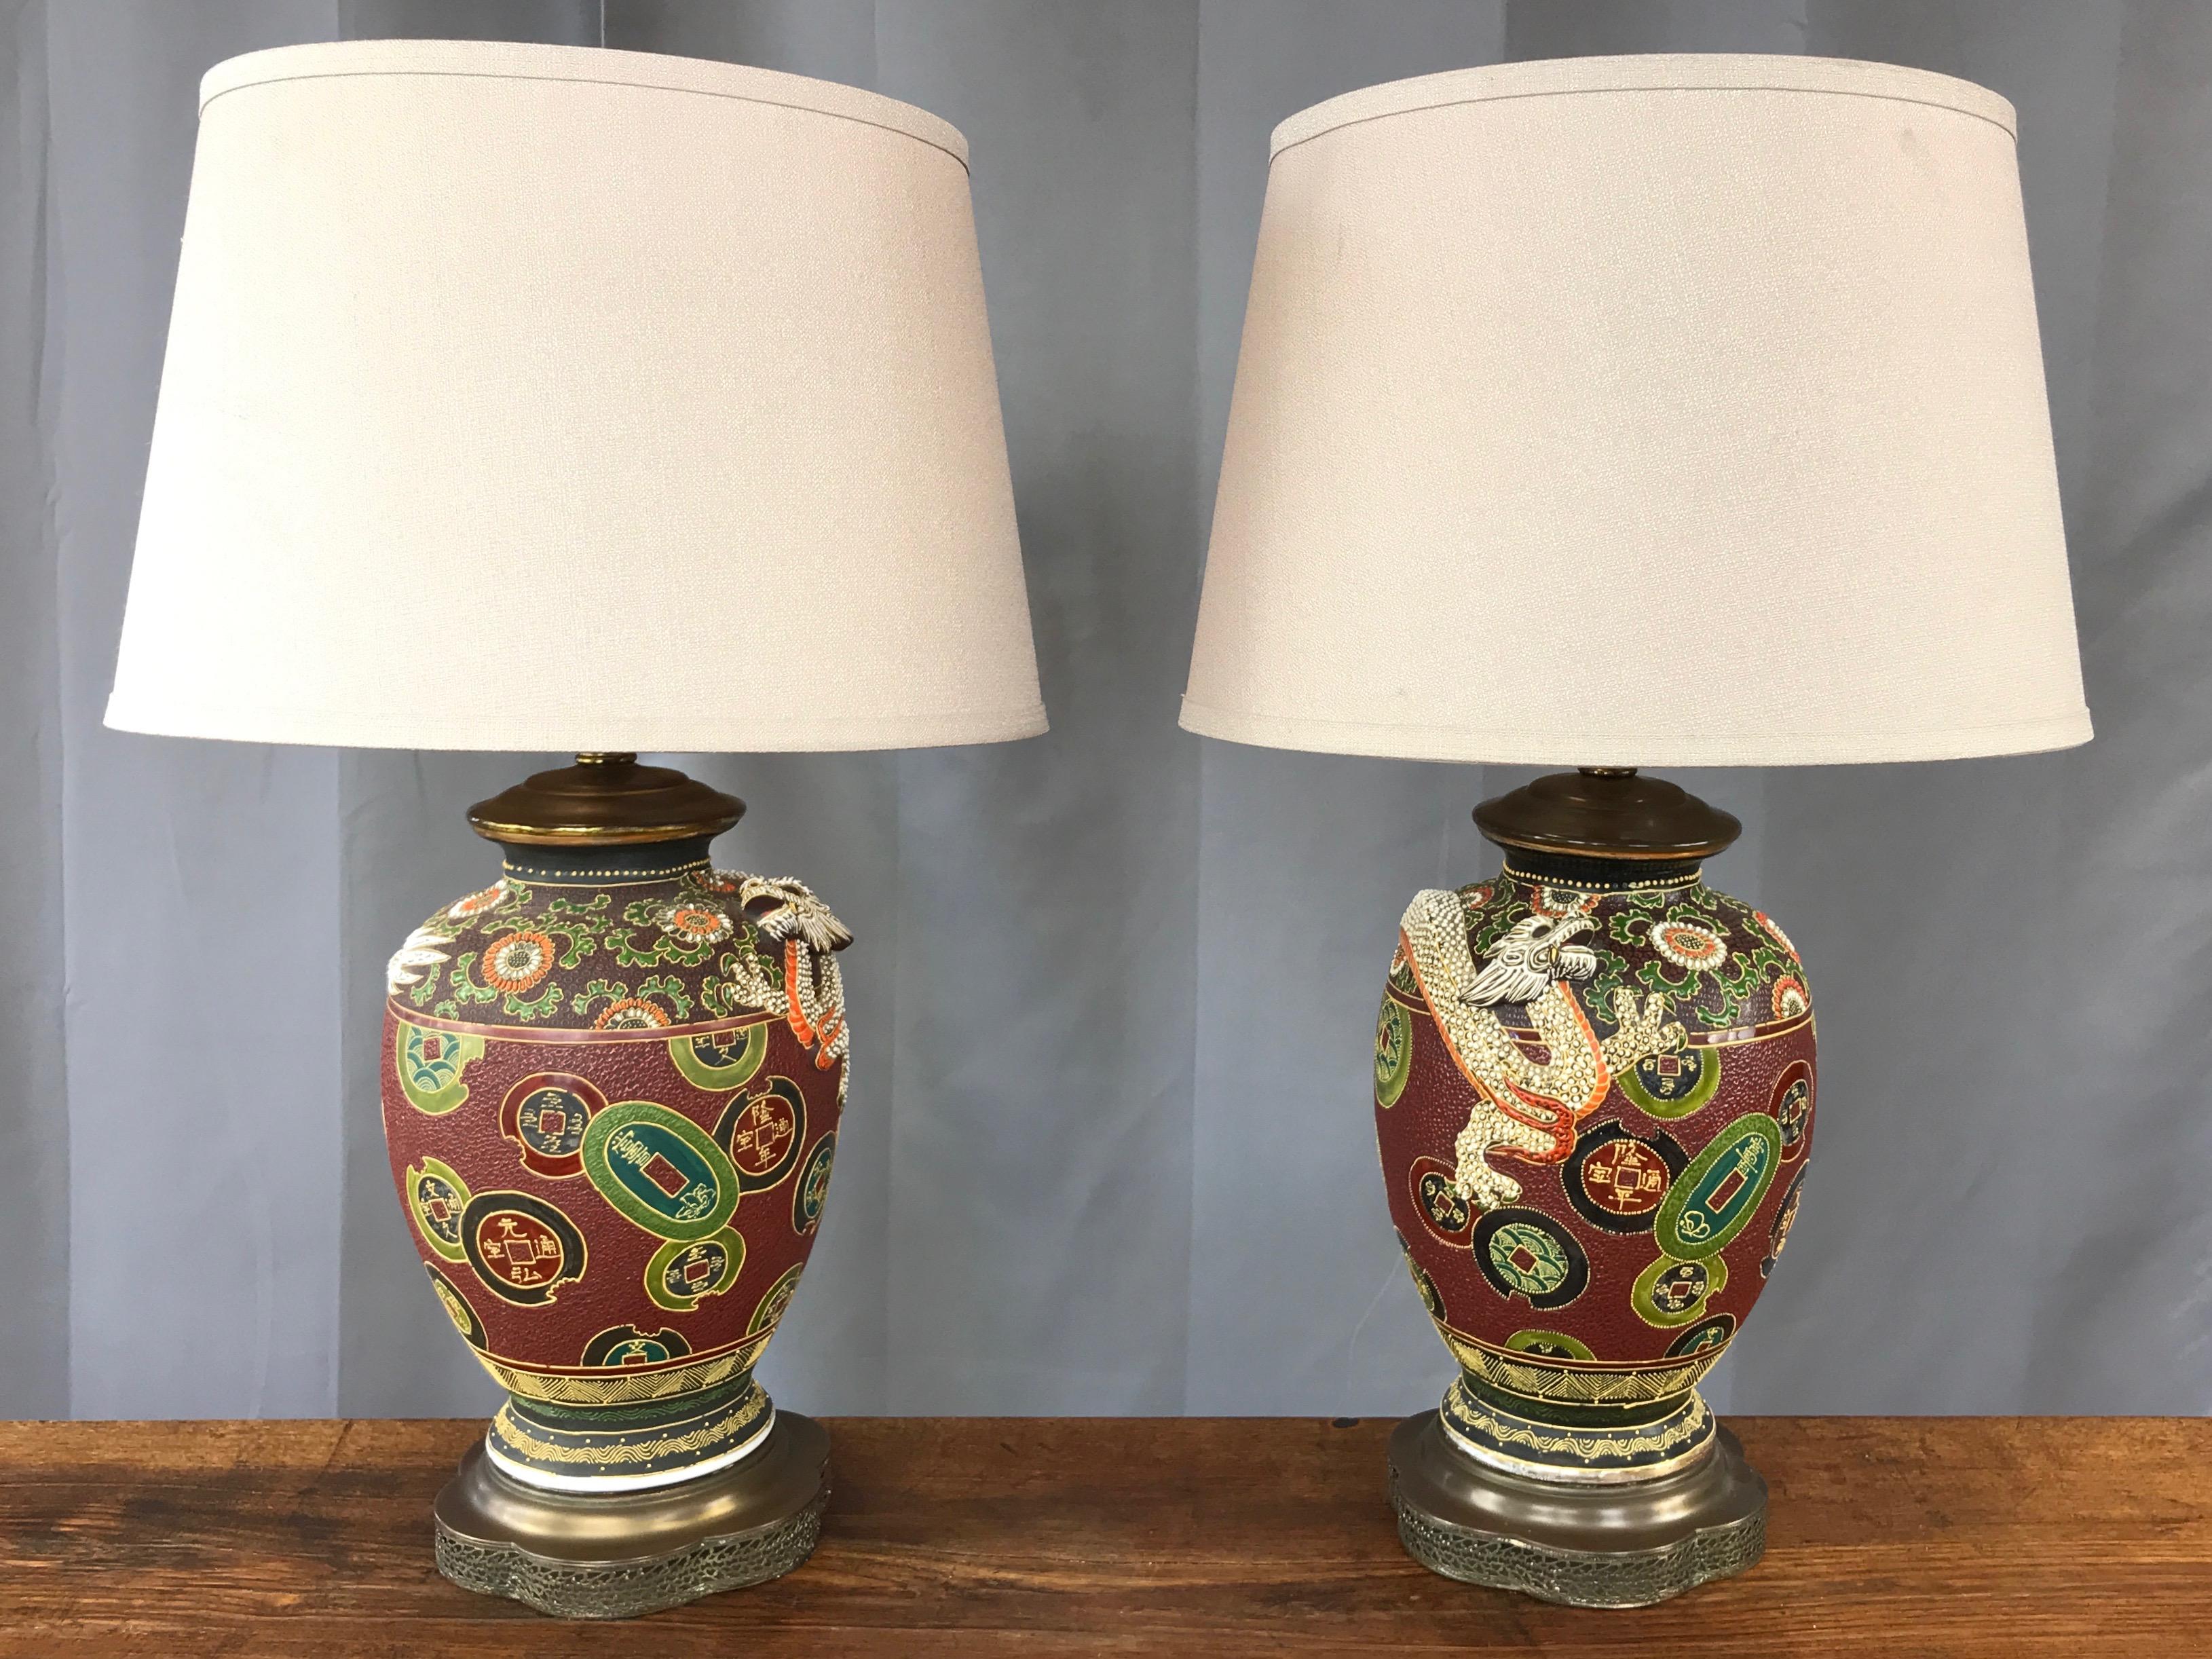 A pair of Japanese midcentury Chinese-style dragon and charm motif hand-decorated ceramic table lamps with pierced brass bases.

Ginger jar form encircled by a white dragon sculpted in exceptionally lively relief. Charms and coins are scattered